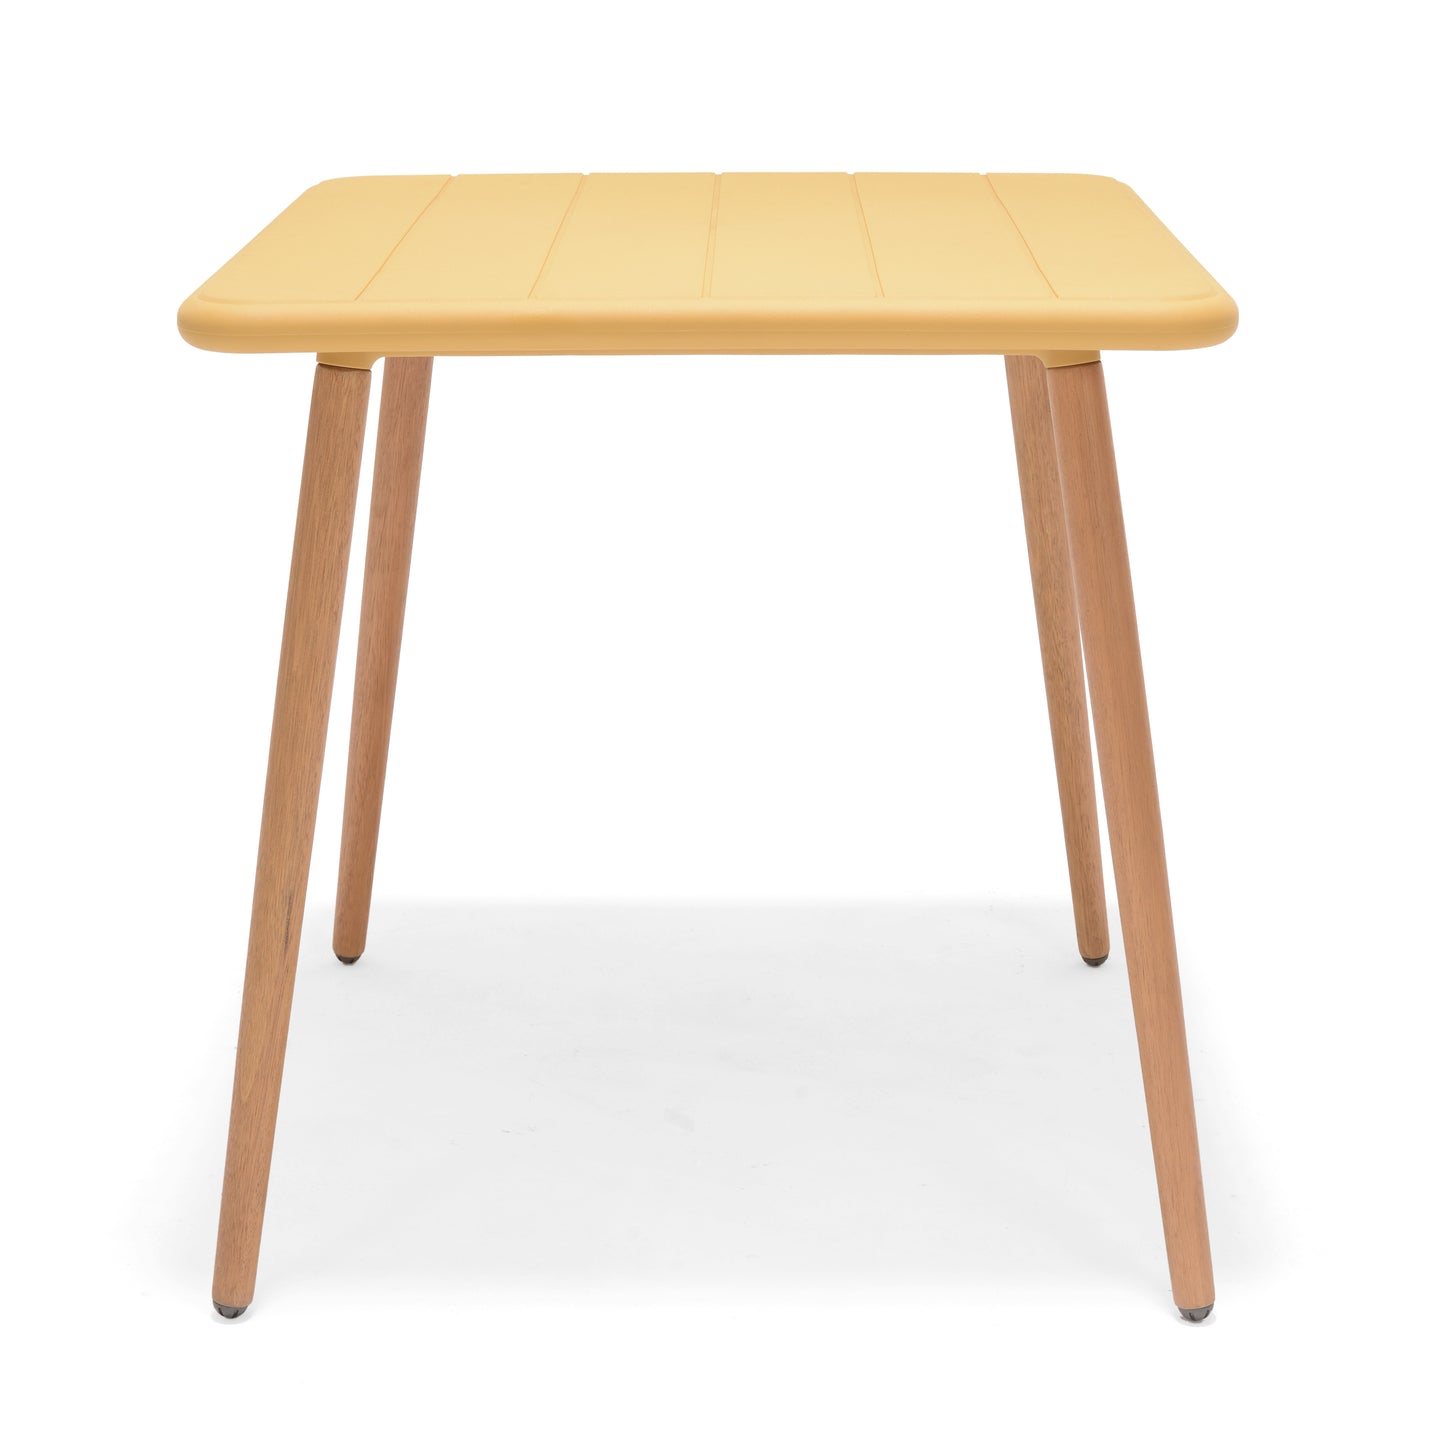 Nassau Square Bistro Table and Chair Set - Honey